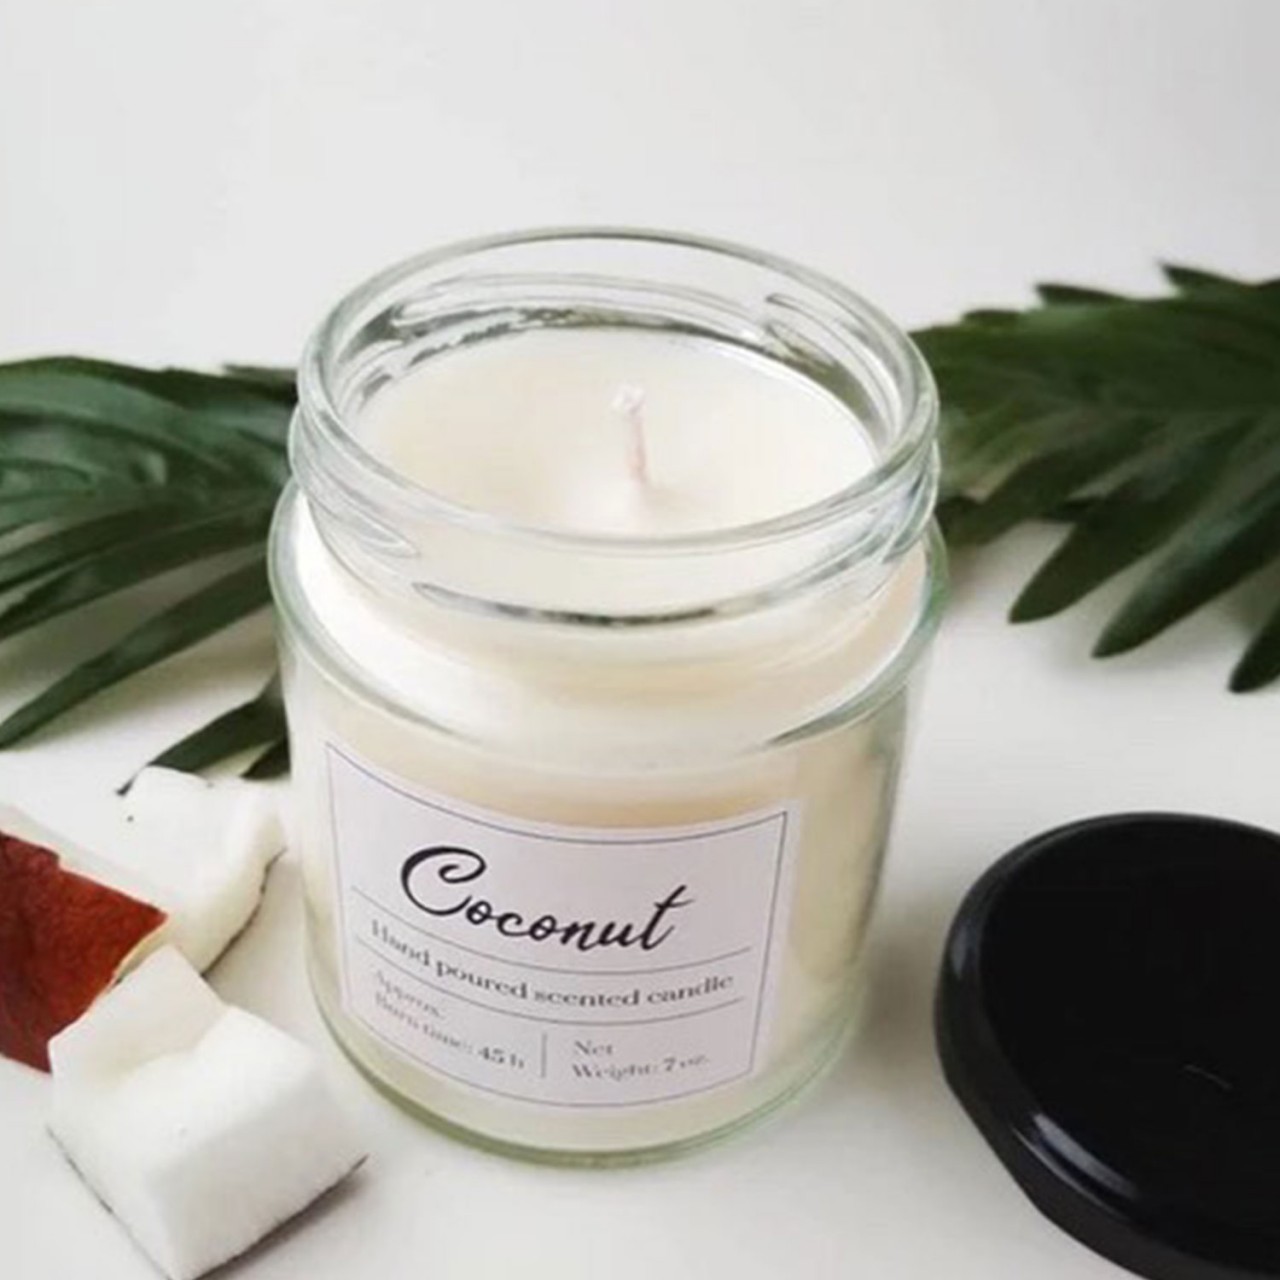 Coconut Jar Scented Candle